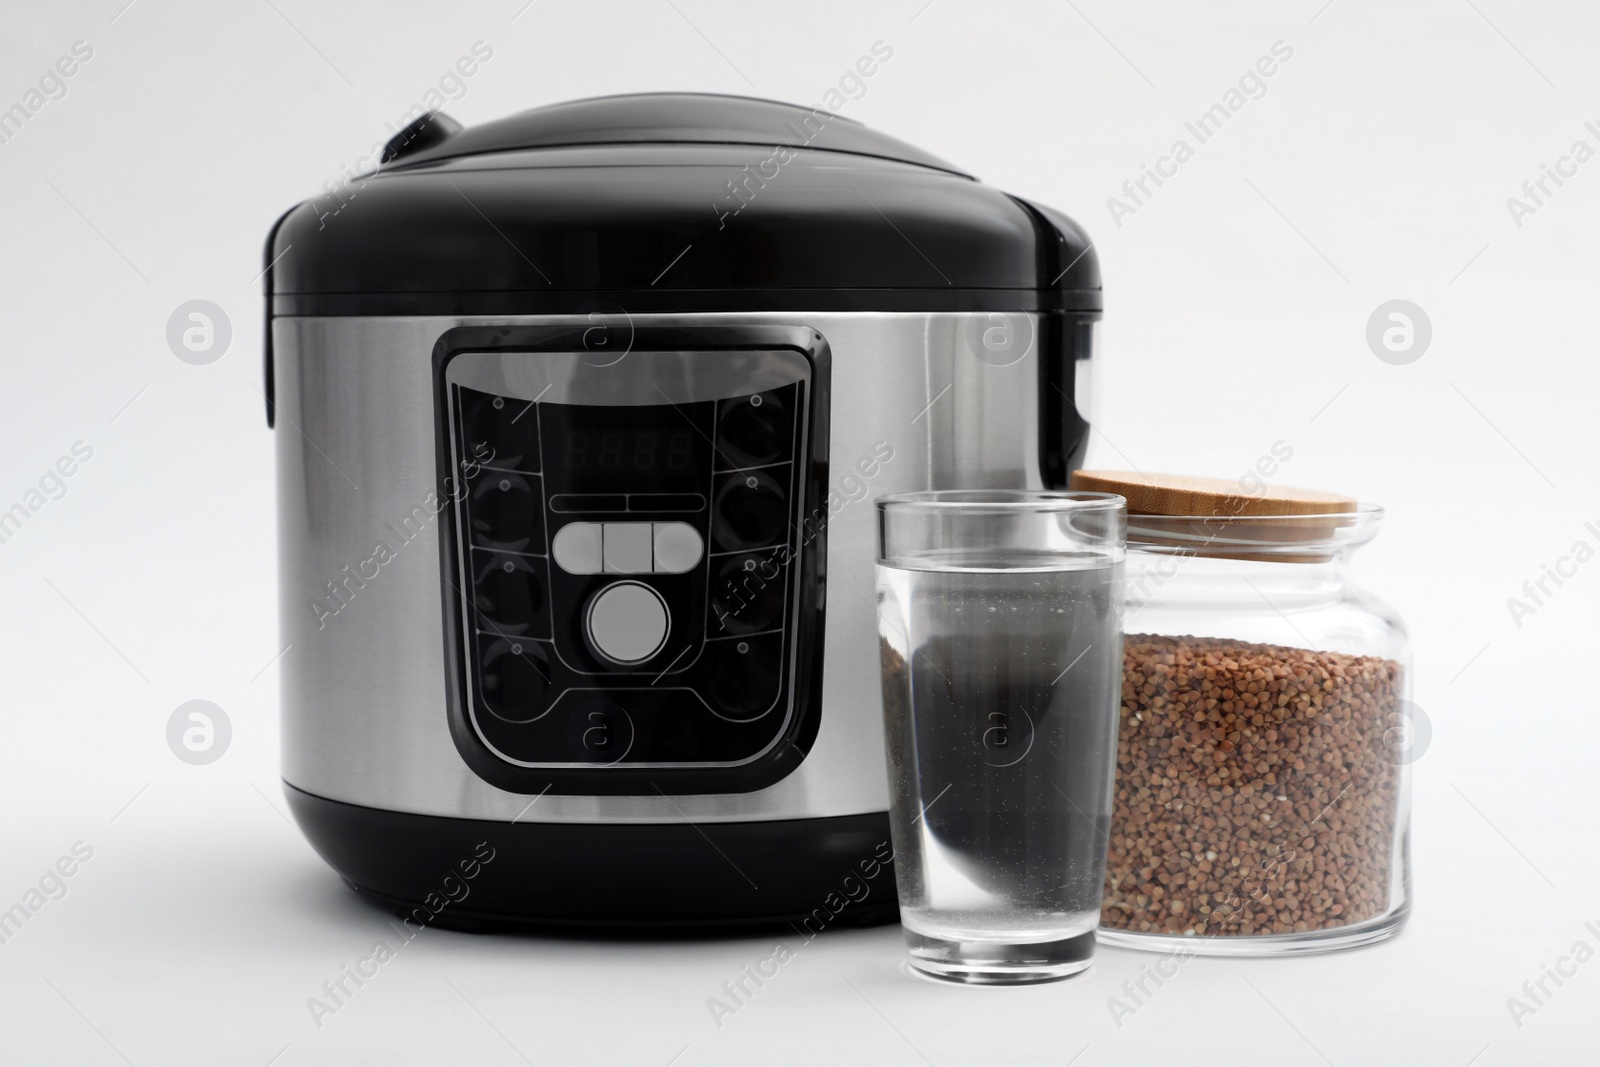 Photo of Modern electric multi cooker, buckwheat and glass of water on light background